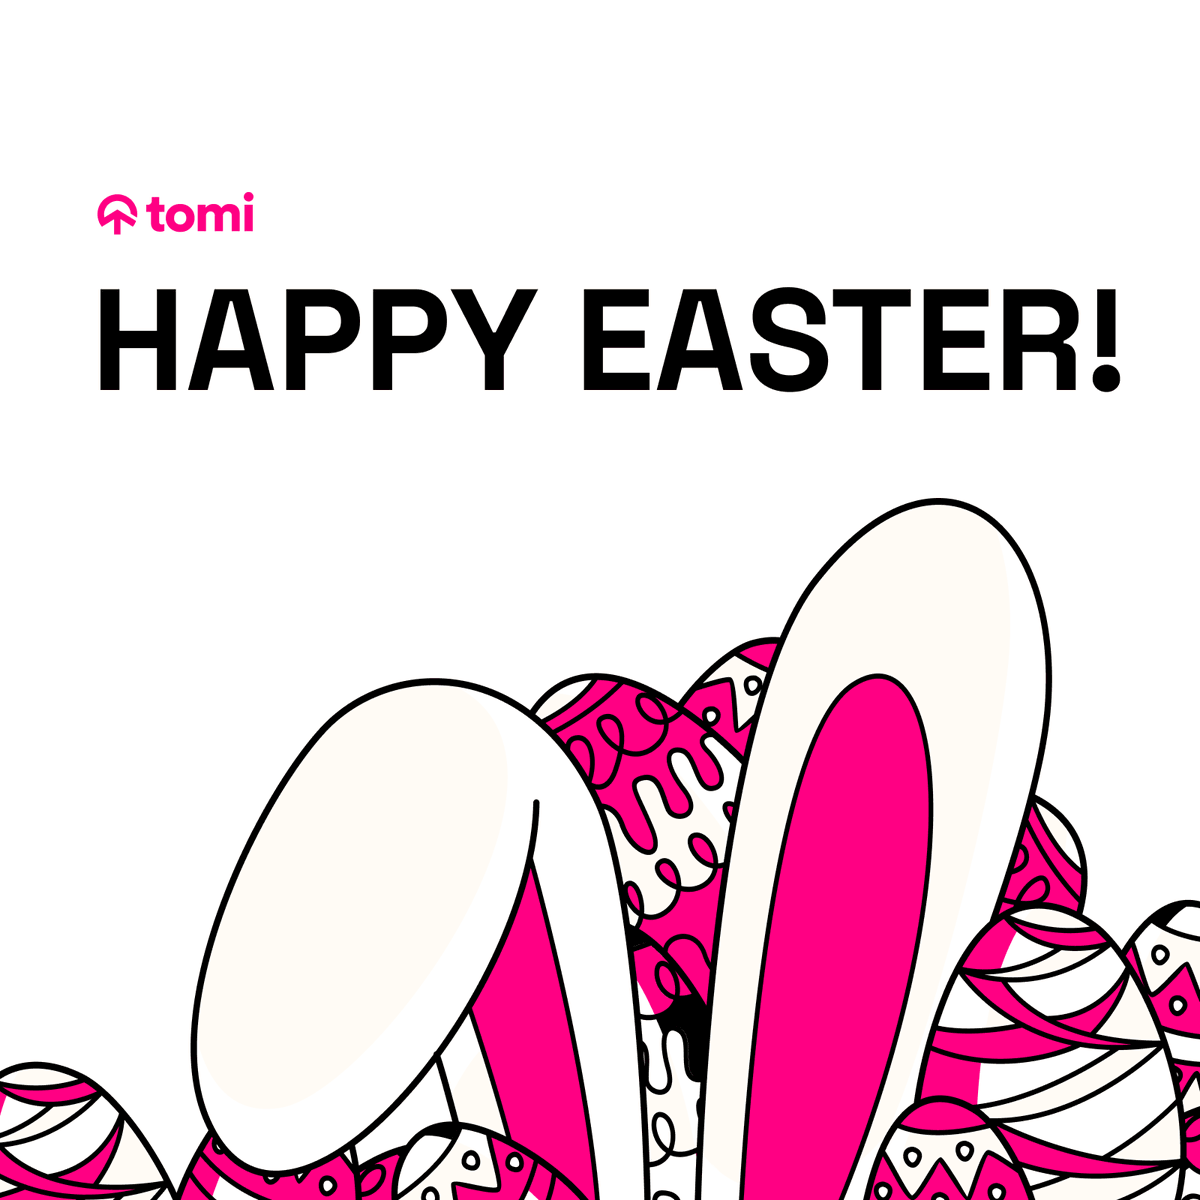 🐰🥚 Hoppy Easter to our amazing tomi community! May your day be filled with joy, laughter, and lots of chocolate treats! 🍫🐣 Let's celebrate this egg-citing holiday together and continue shaping Web3 with tomi!